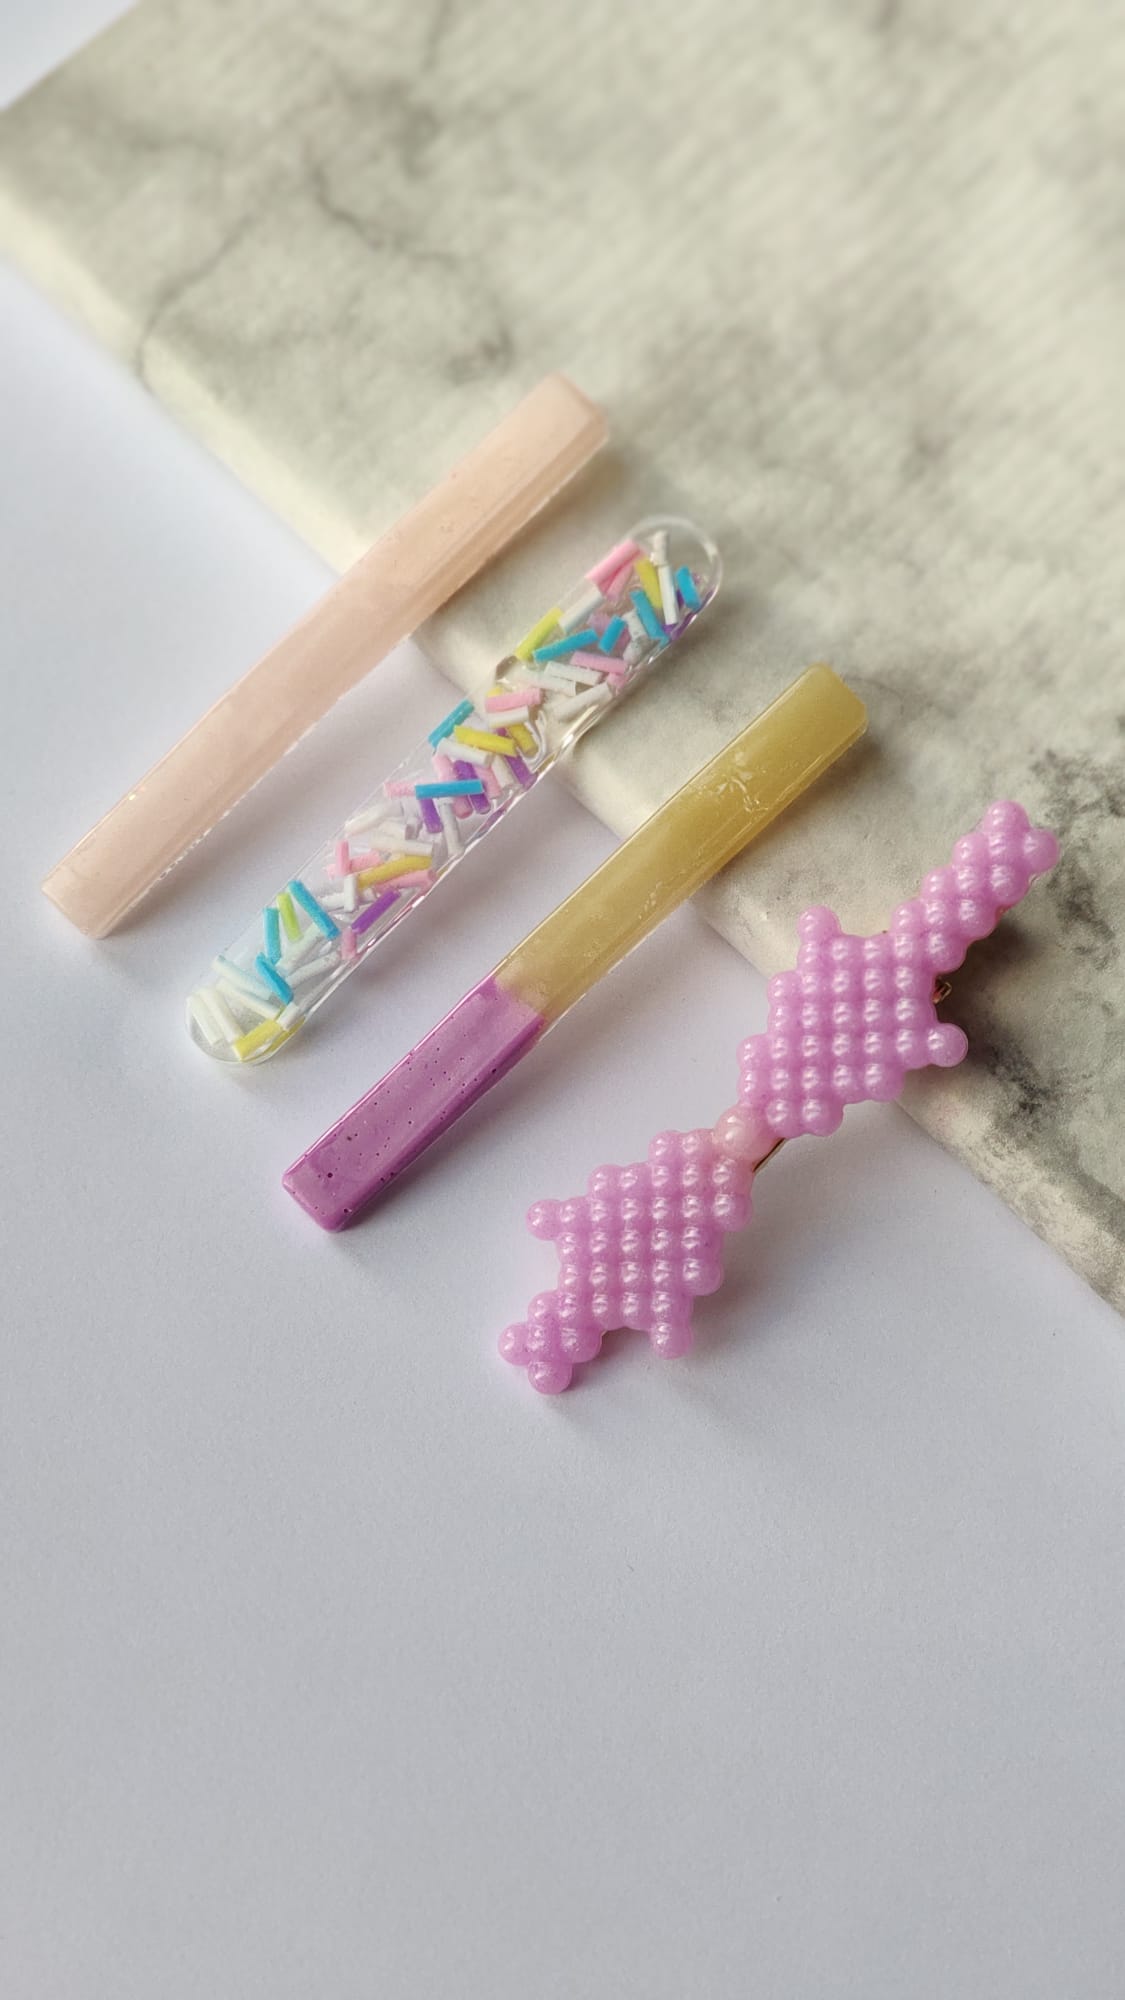 PASTEL DREAM PACK - Set of 4 Hair clips